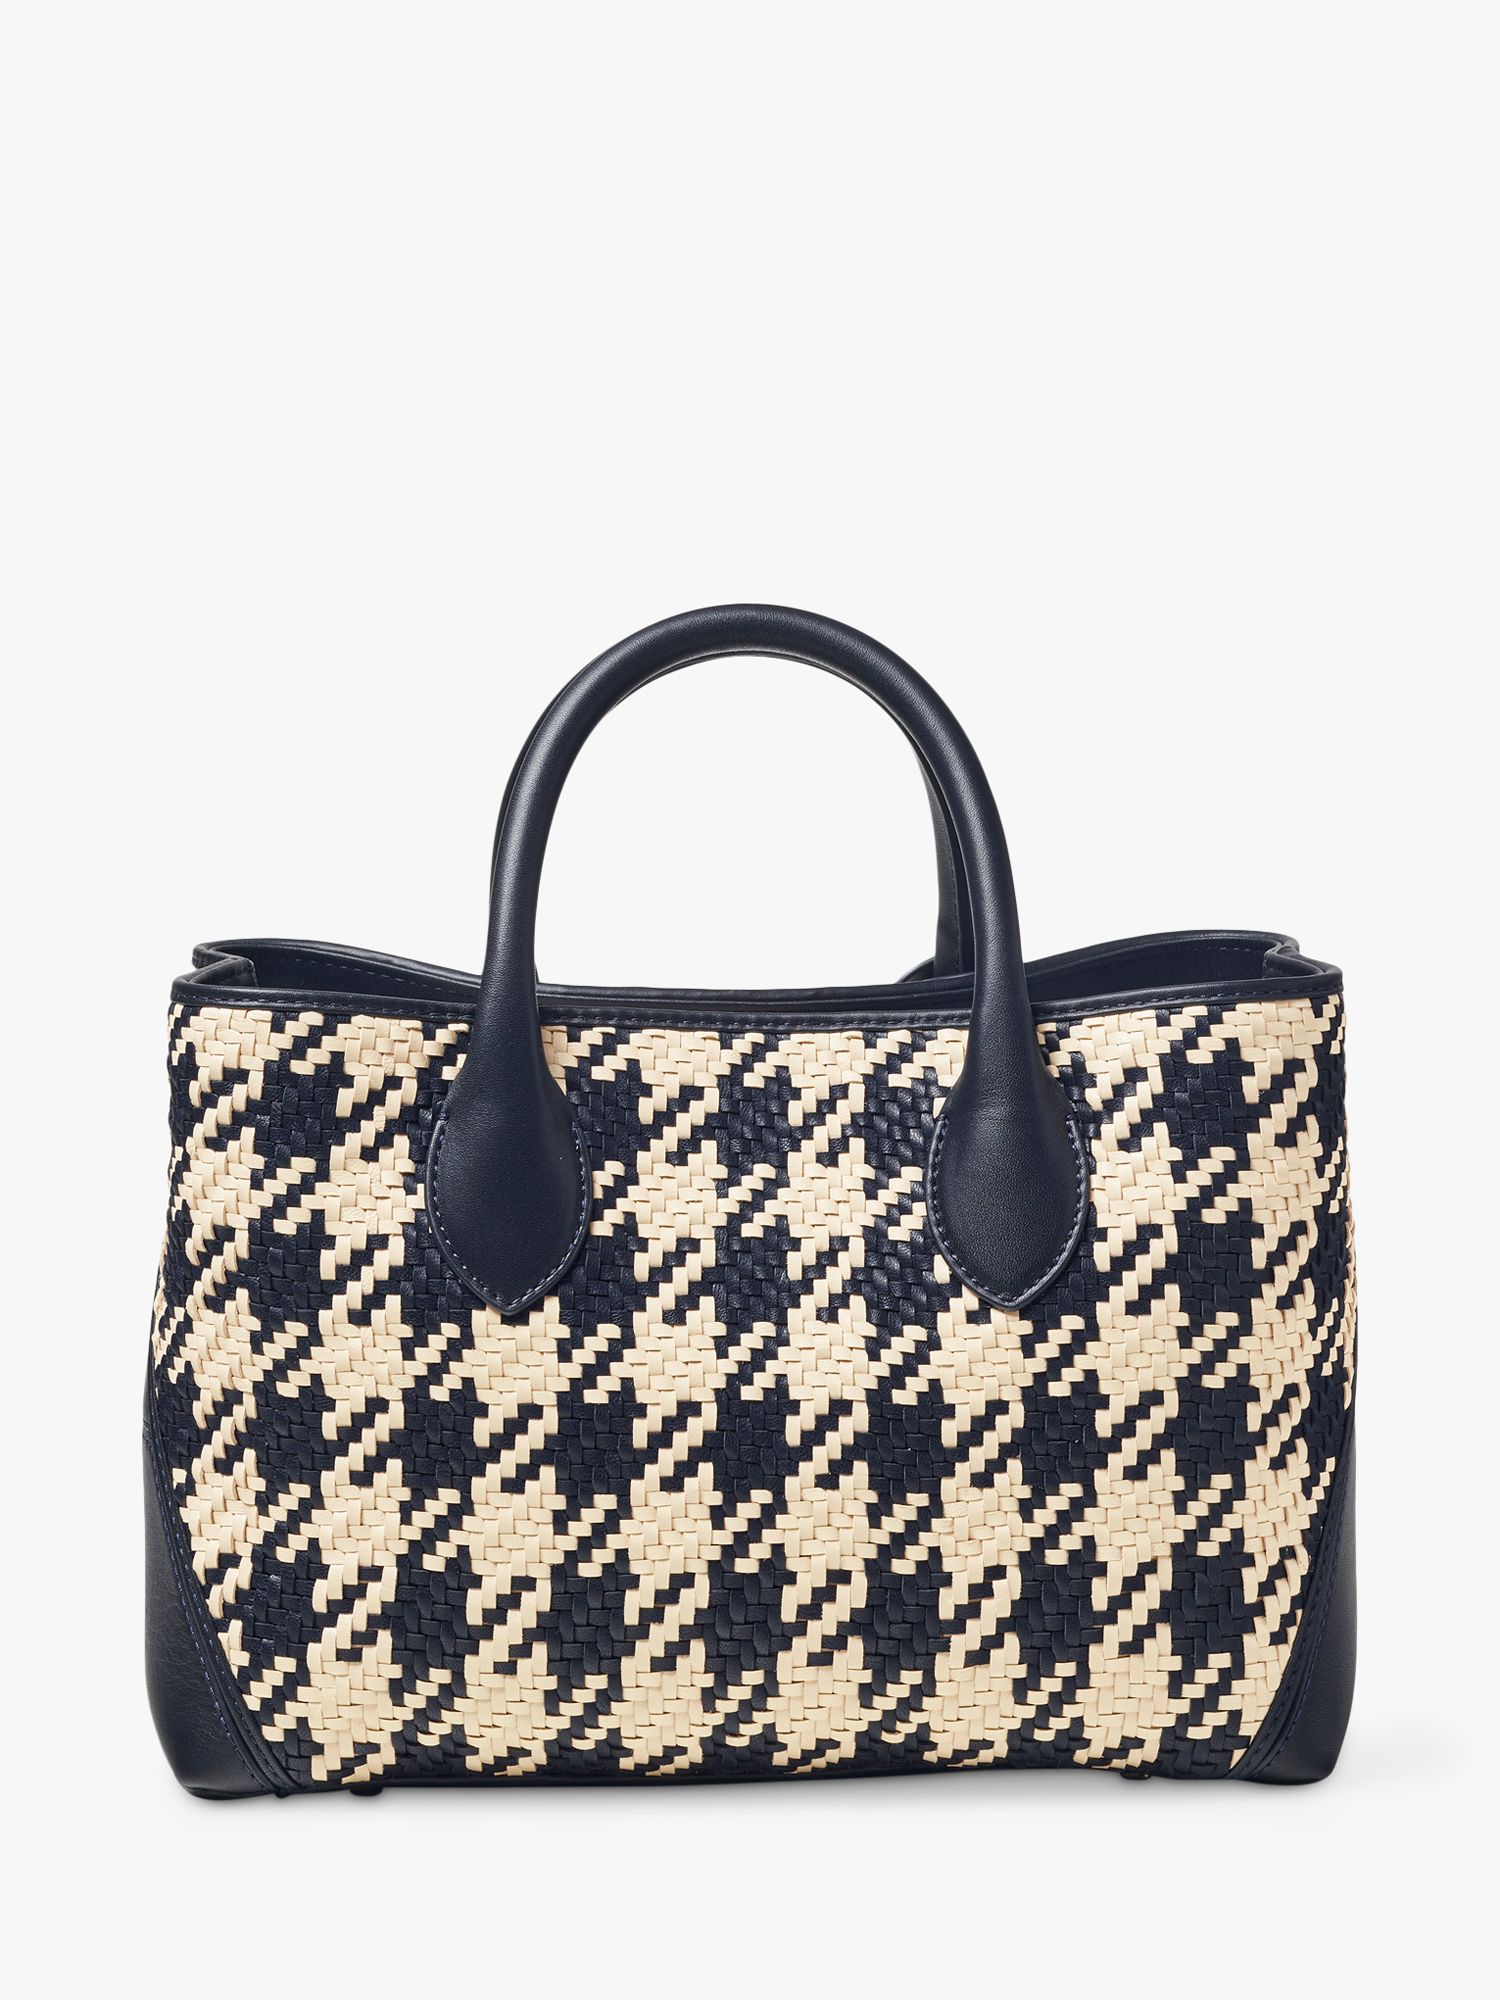 Buy Aspinal of London London Midi Dogtooth Weave Leather Tote Bag, Navy/Ivory Online at johnlewis.com